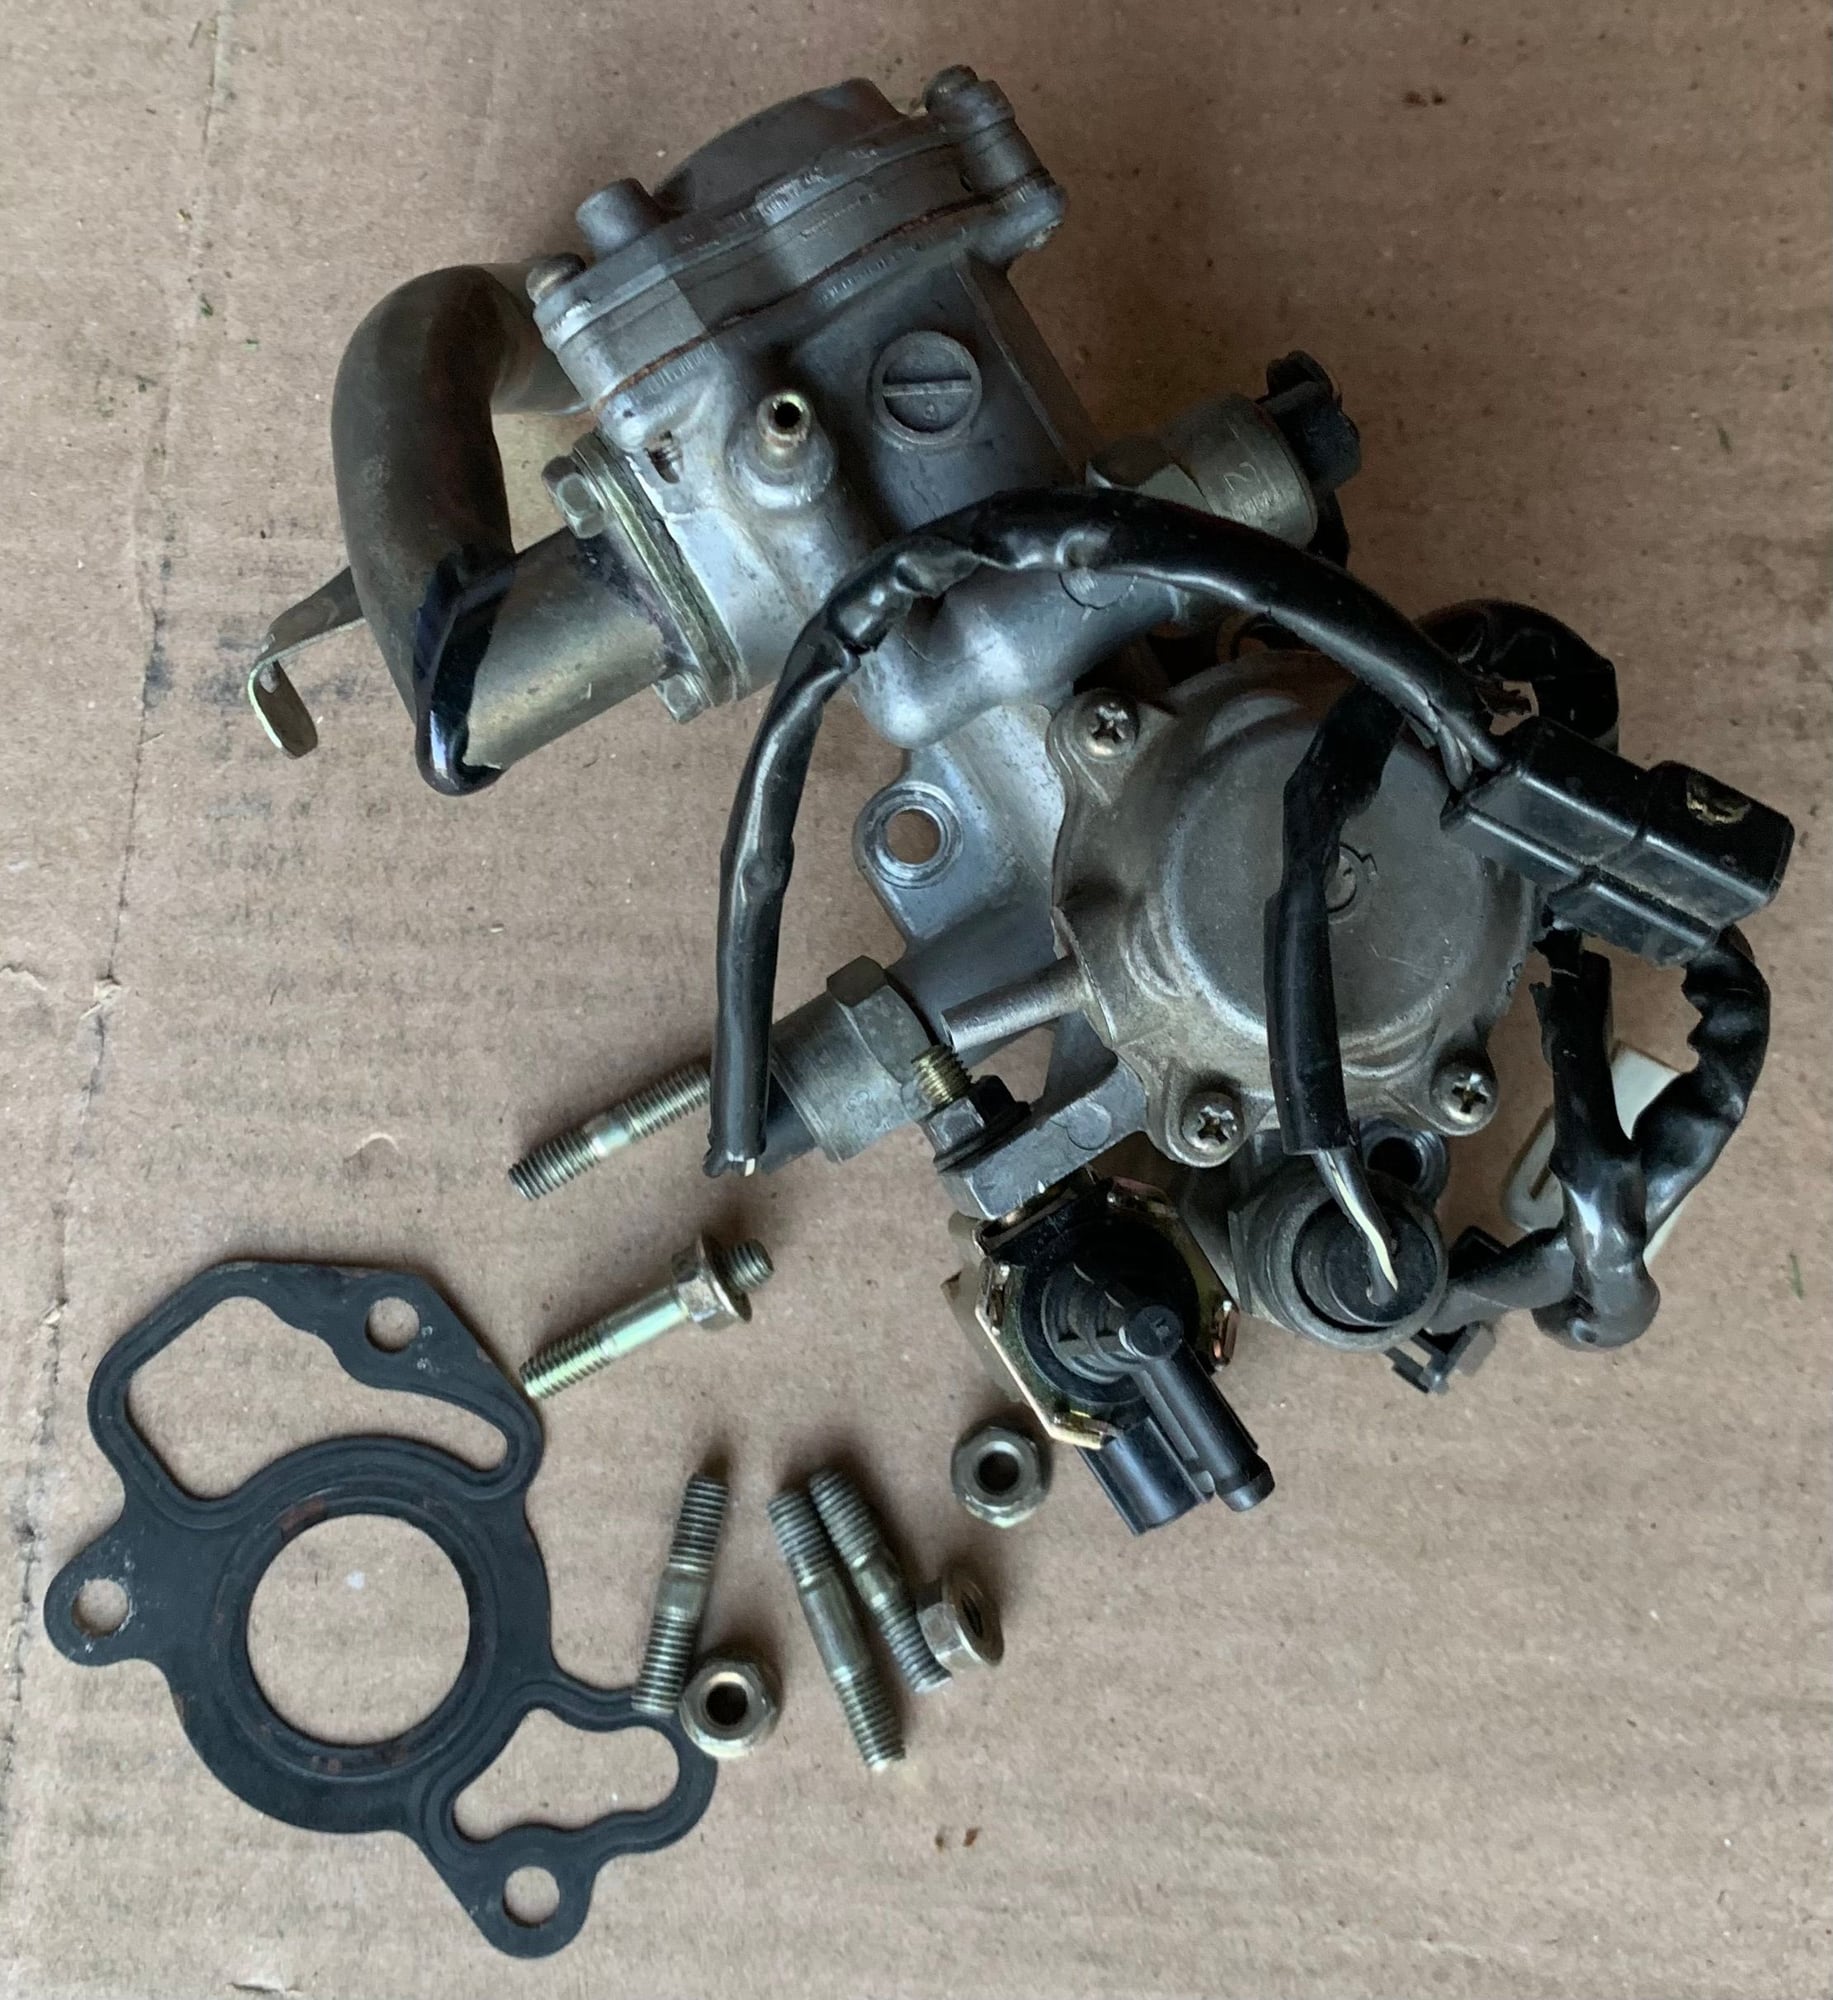 Miscellaneous - FD OEM Engine Parts - Used - 1993 to 1995 Mazda RX-7 - Providence, RI 02910, United States